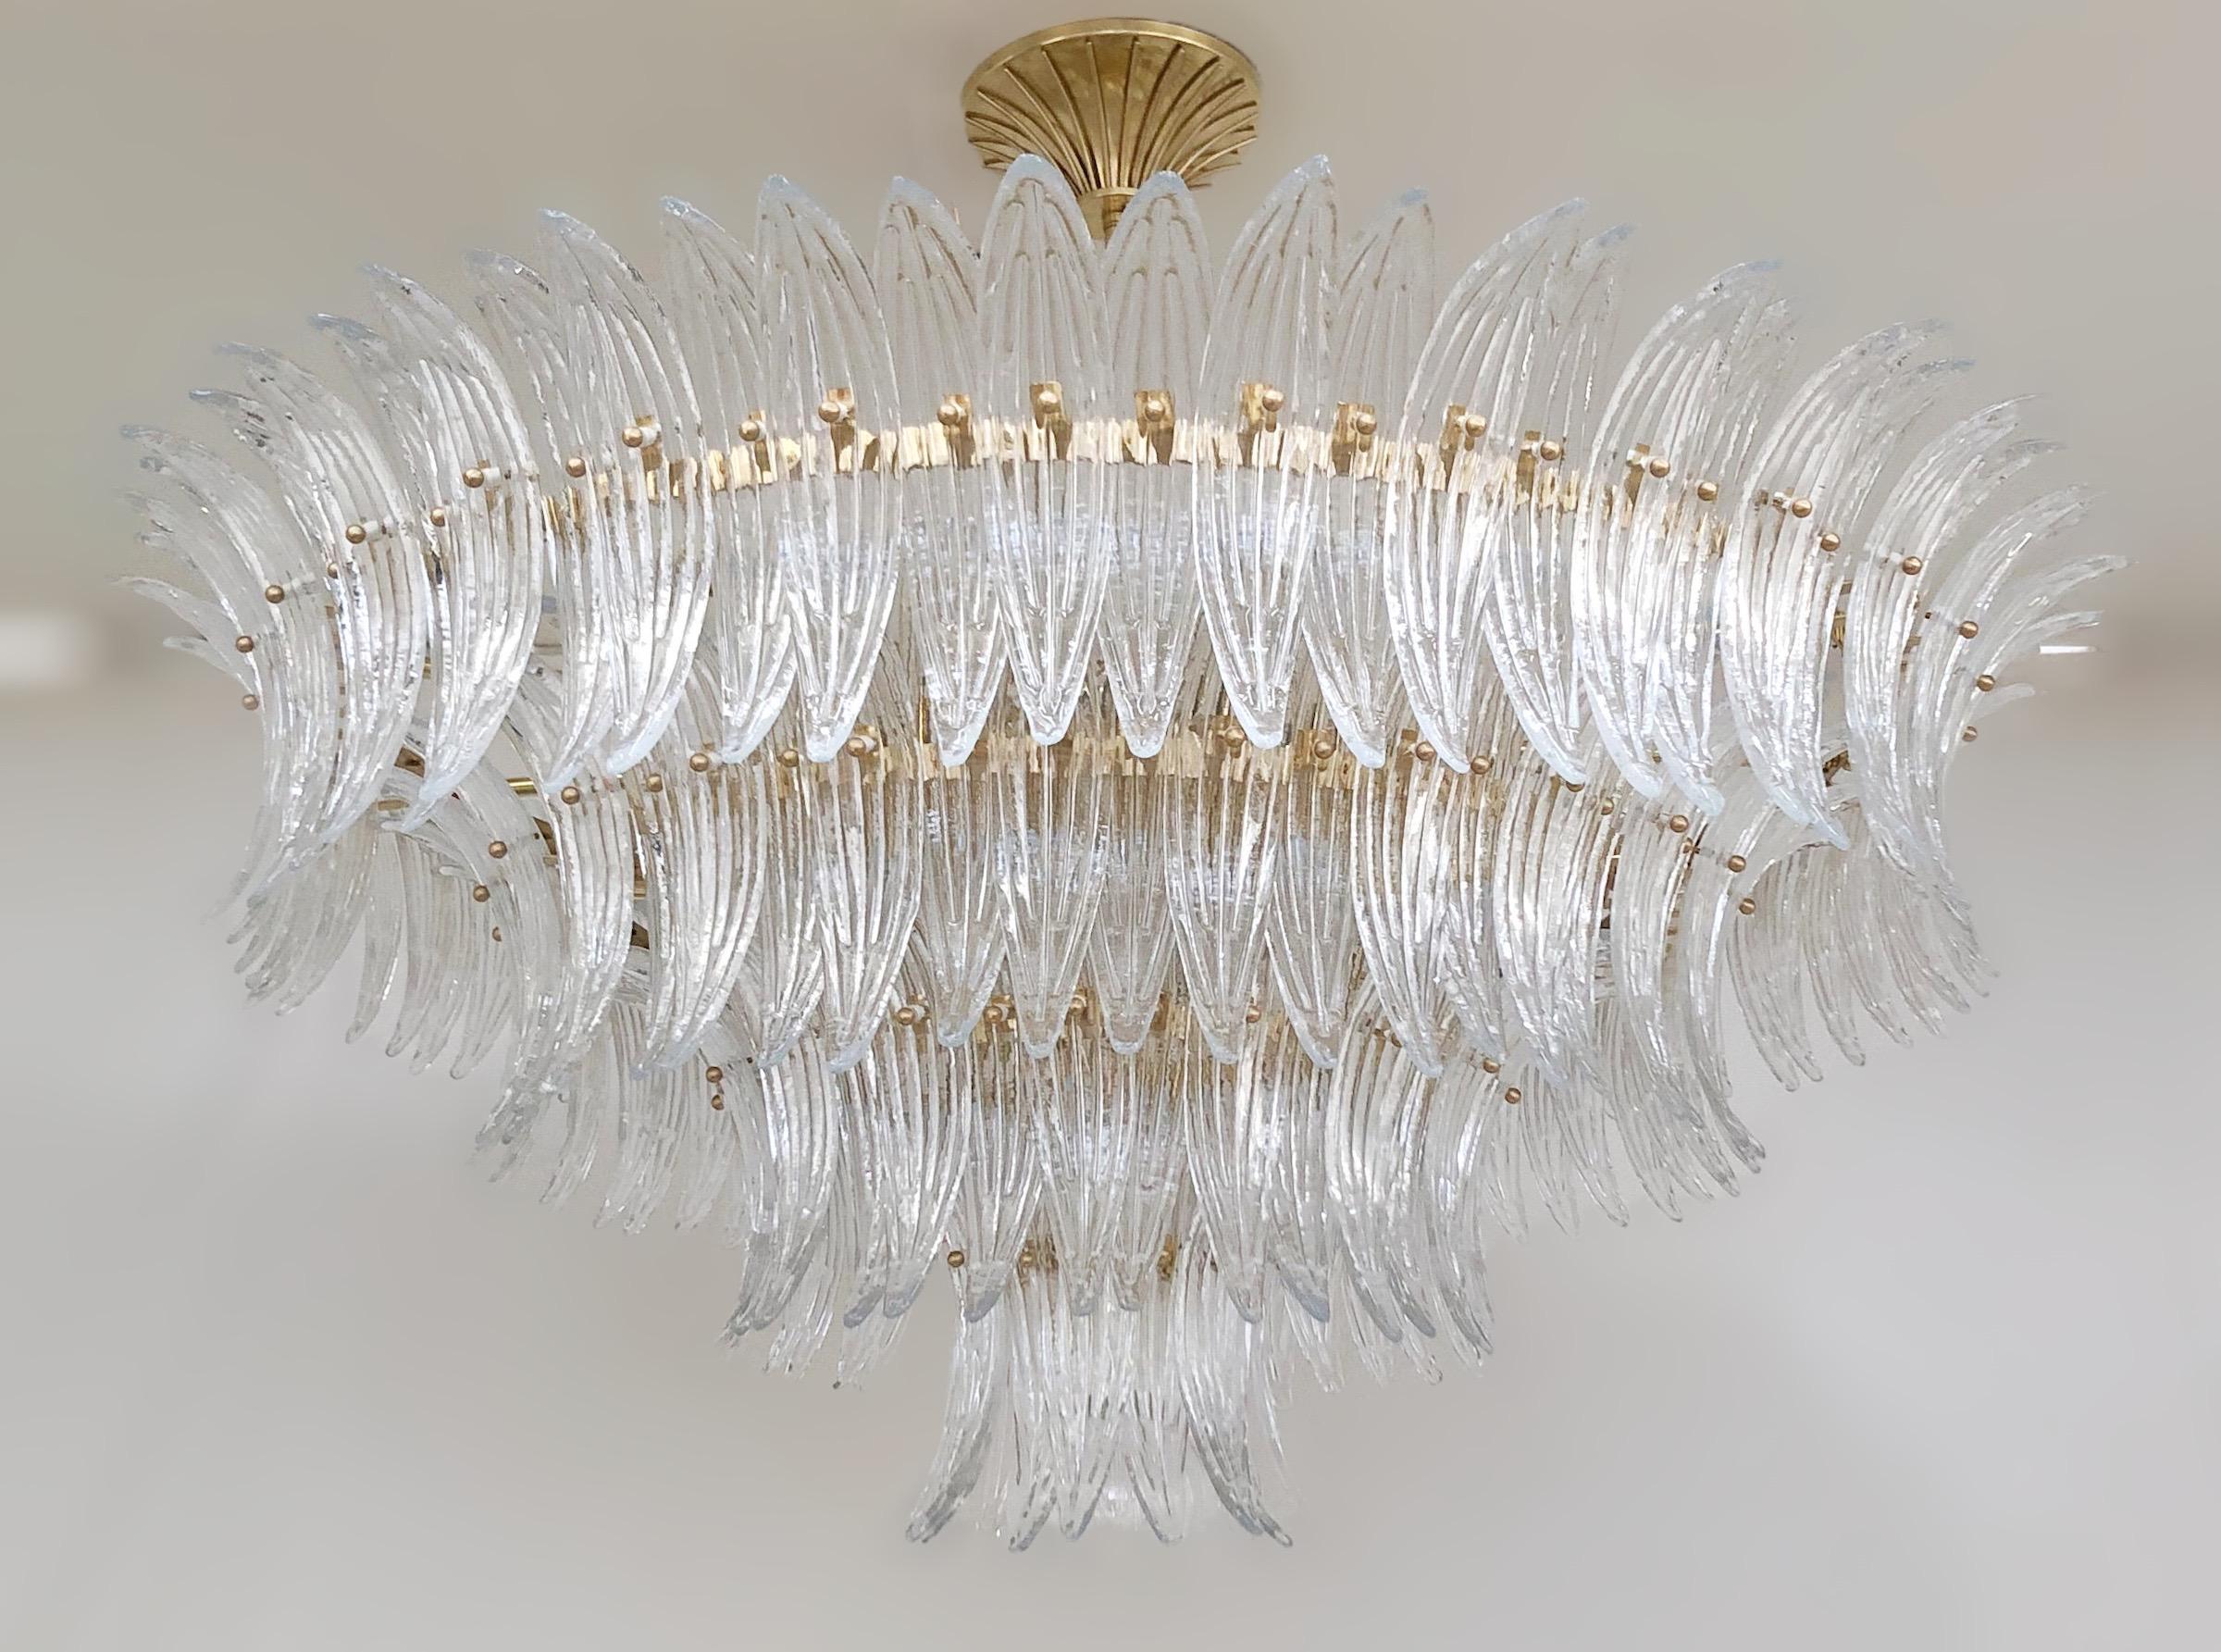 Italian Palmette chandelier shown in clear Murano glass leaves mounted on unlacquered natural brass finish frame with a clear glass ball / Made in Italy
Measures: diameter 47 inches, height 22 inches, total height 35.5 inches including rod and